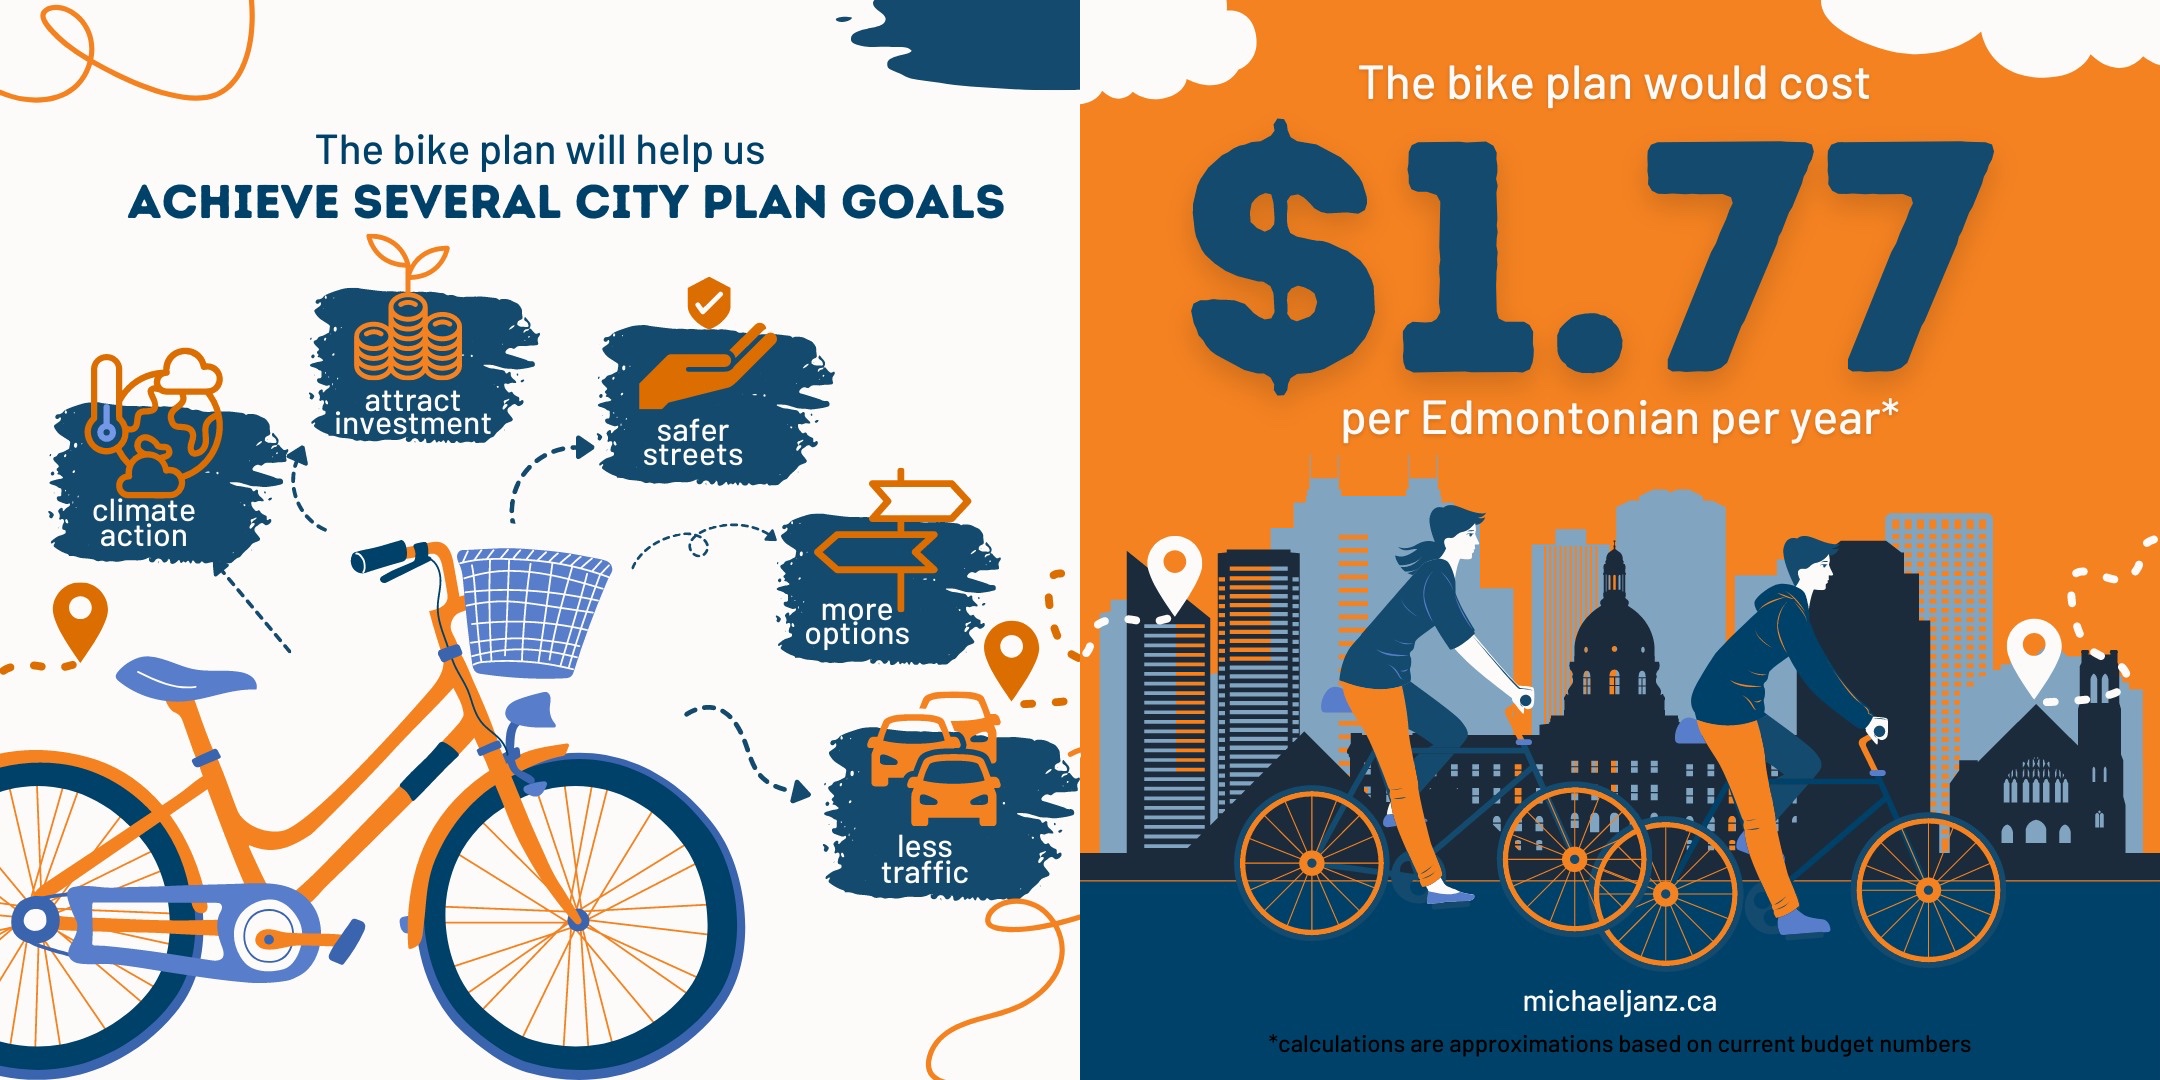 Cost of the Bike Plan